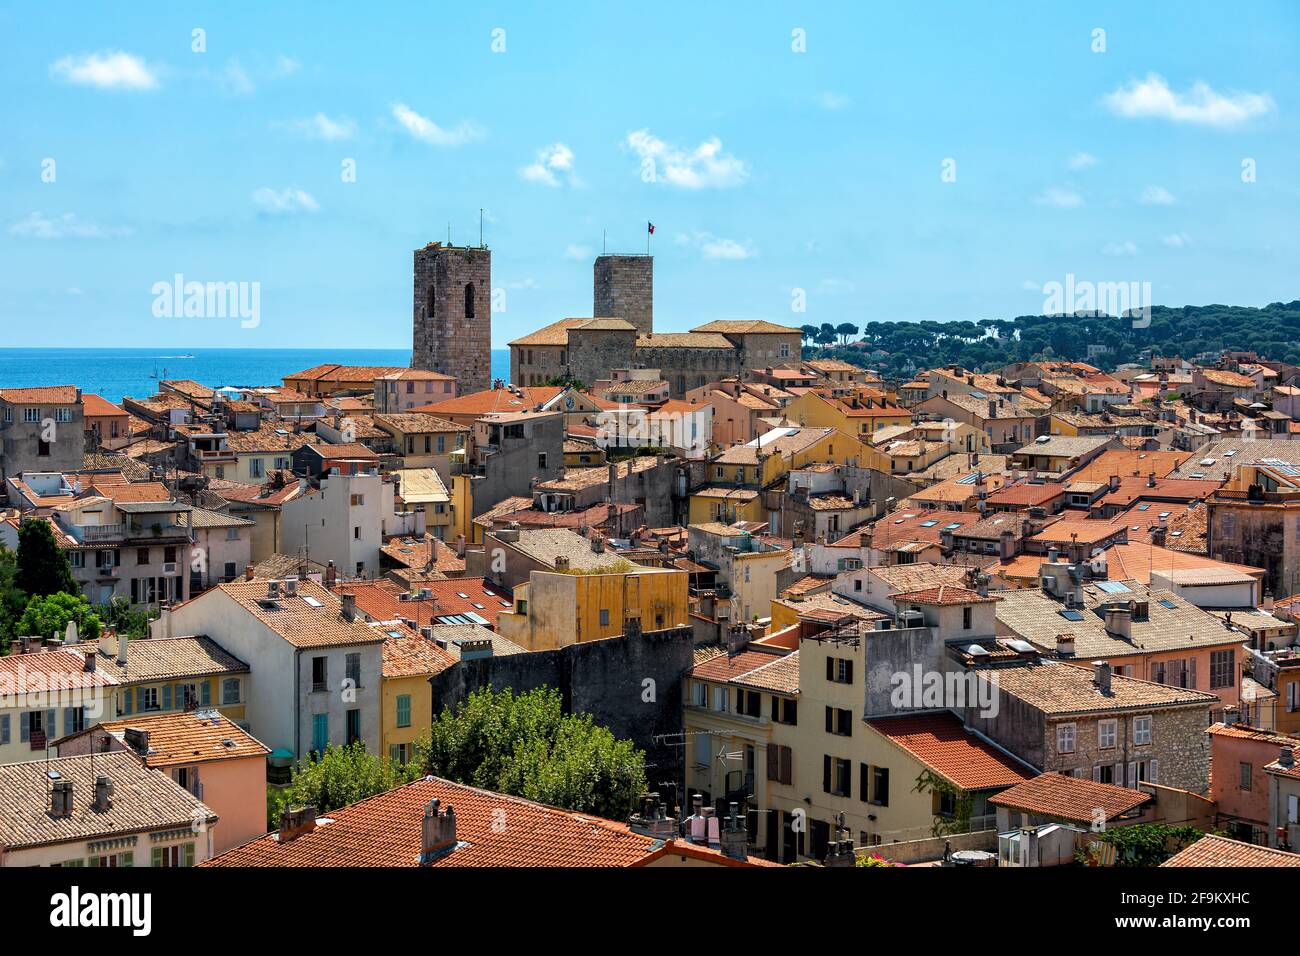 View from above of old town of Antibes under blue sky in France. Stock Photo